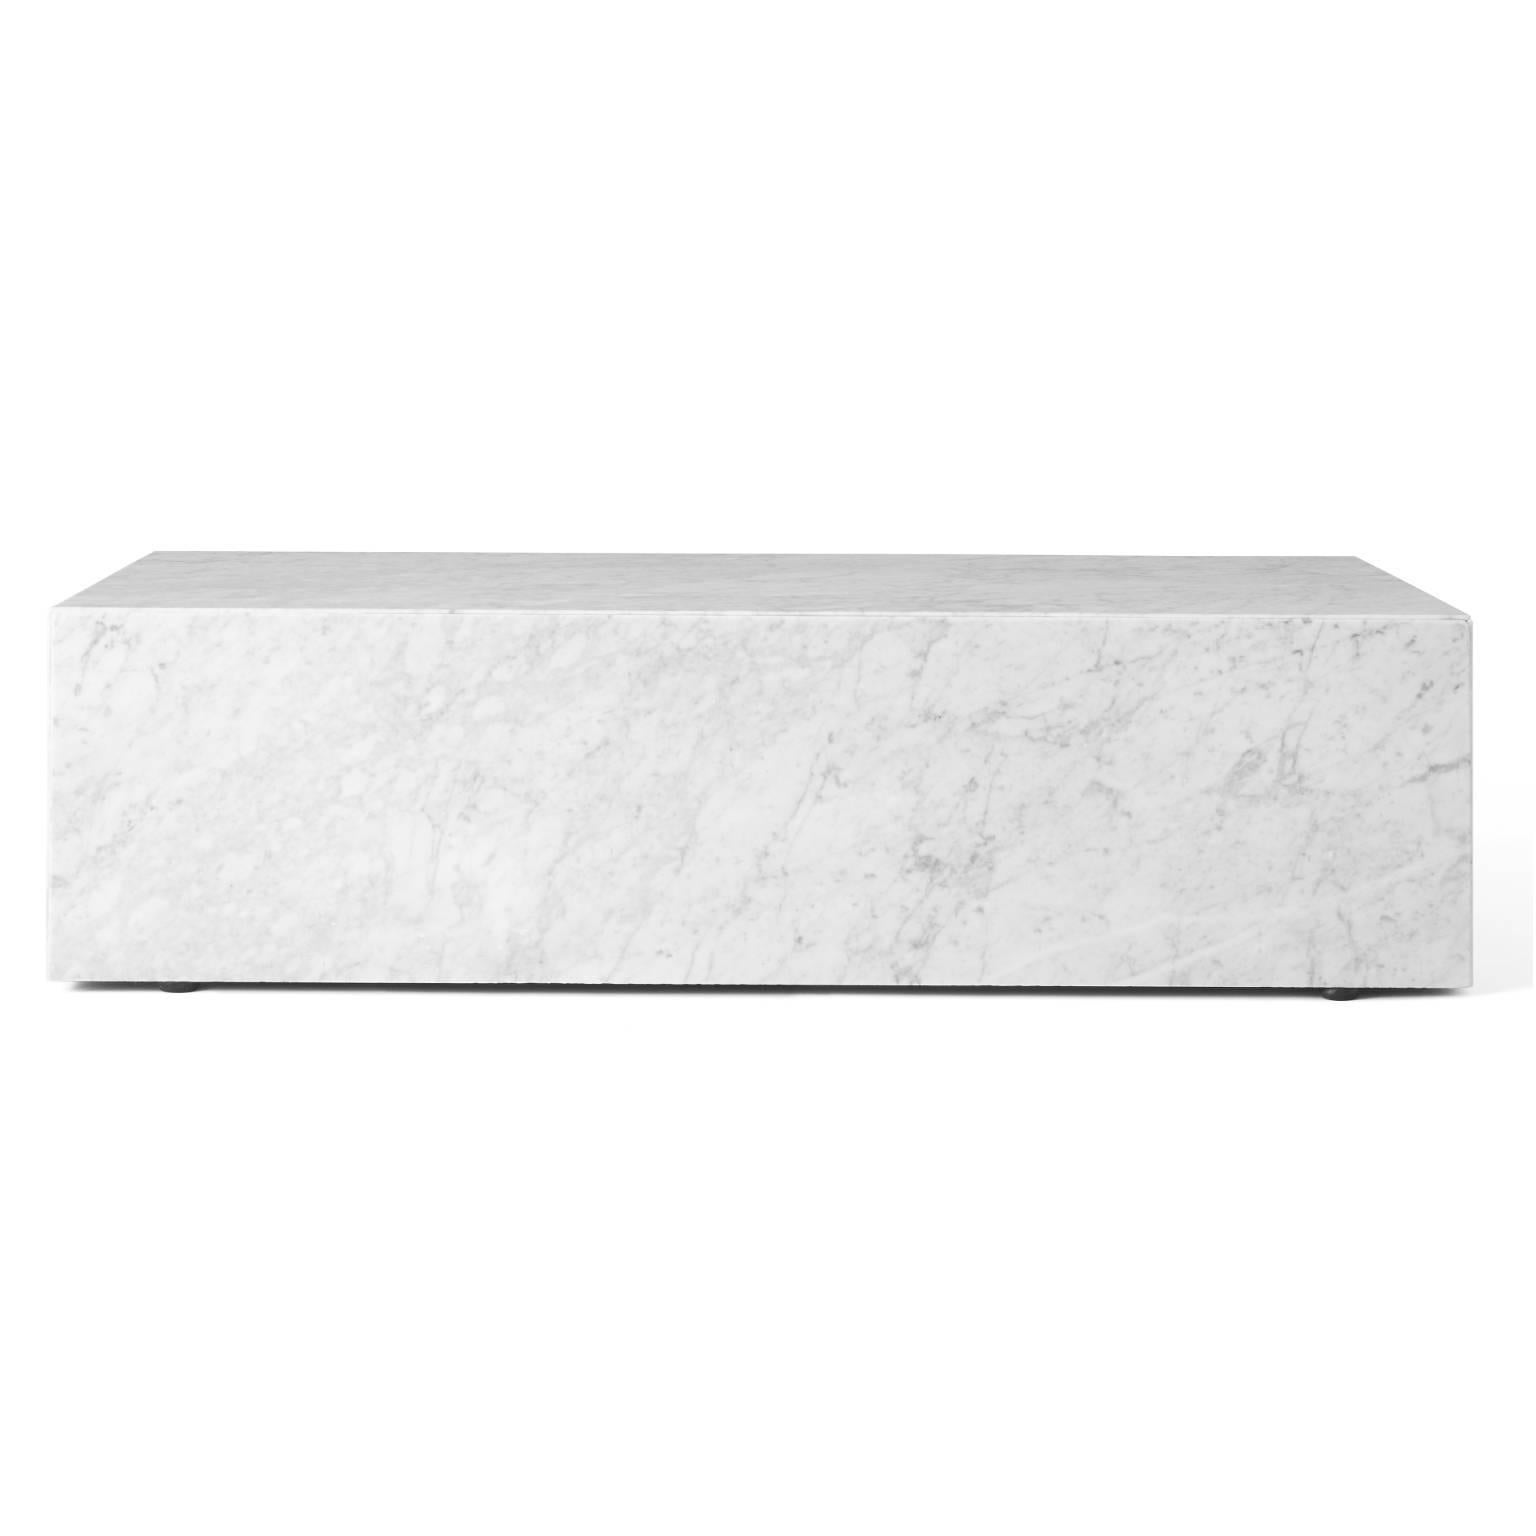 Over centuries, the plinth has been a much mused-over object. With this project Danish studio Norm Architects set out to rethink the uses of the plinth and to reveal the natural beauty of marble. The result is a series of podiums with multiple uses